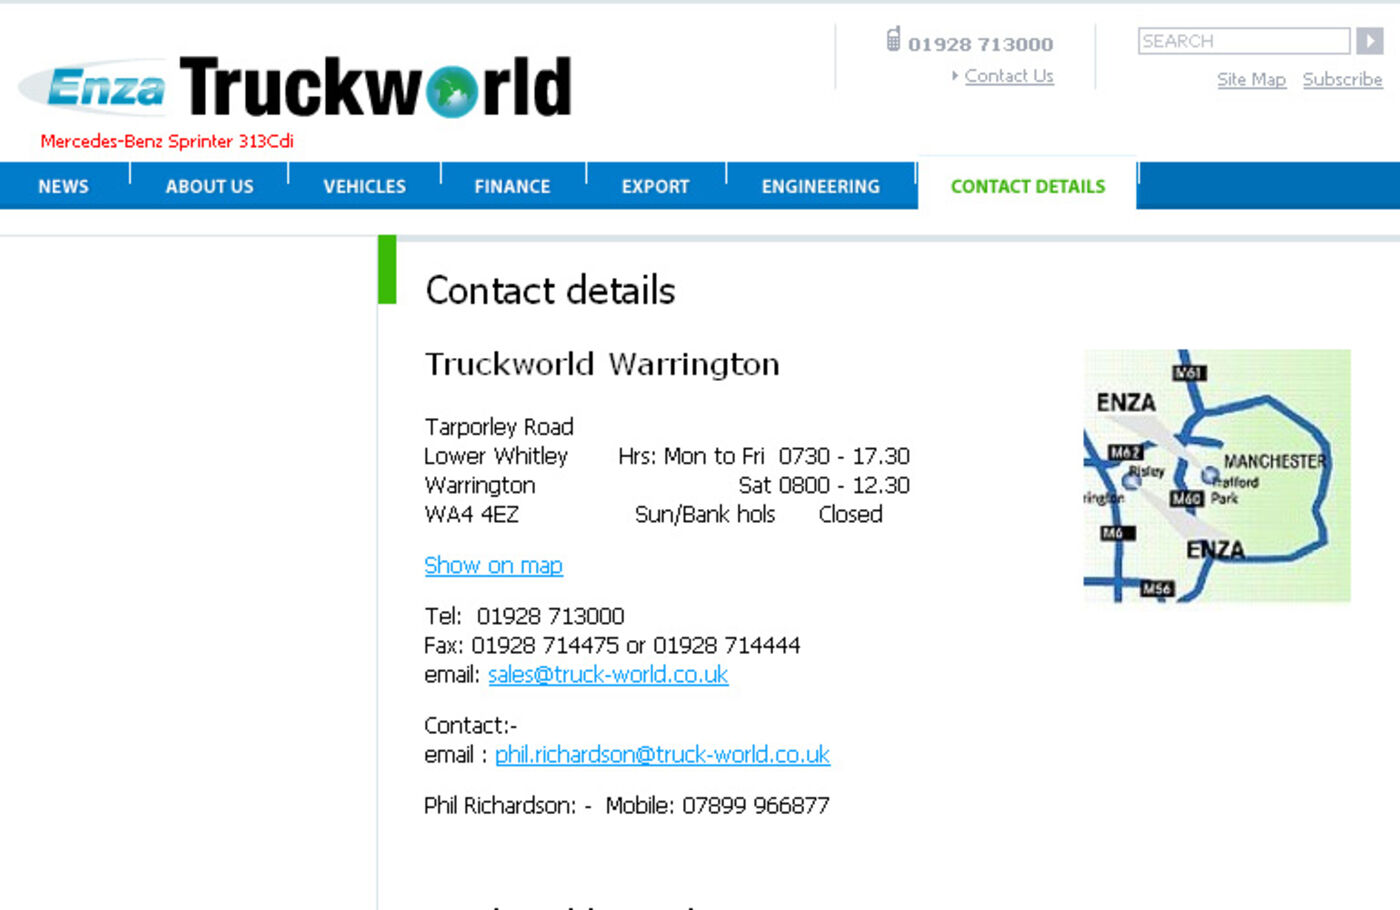 Enza's Truck World Contact details